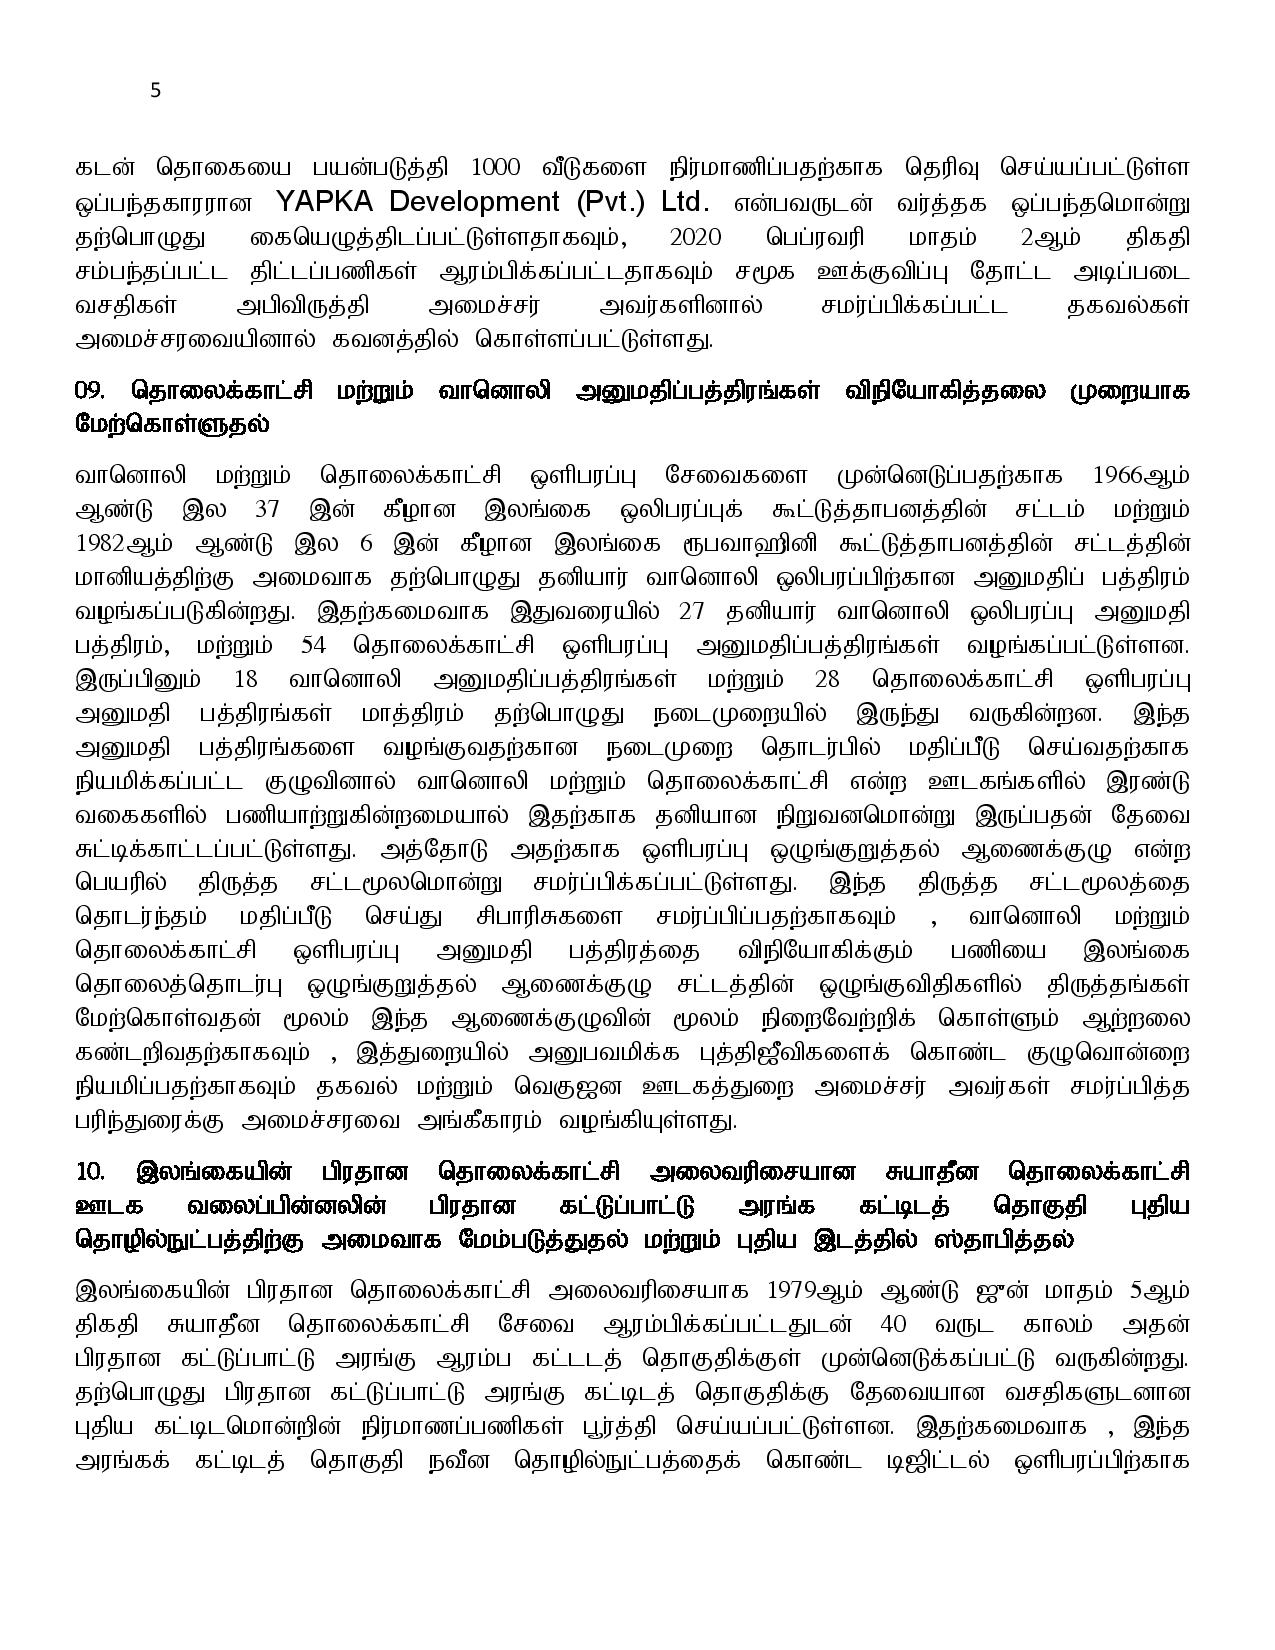 04.03.2020 cabinet Tamil page 005